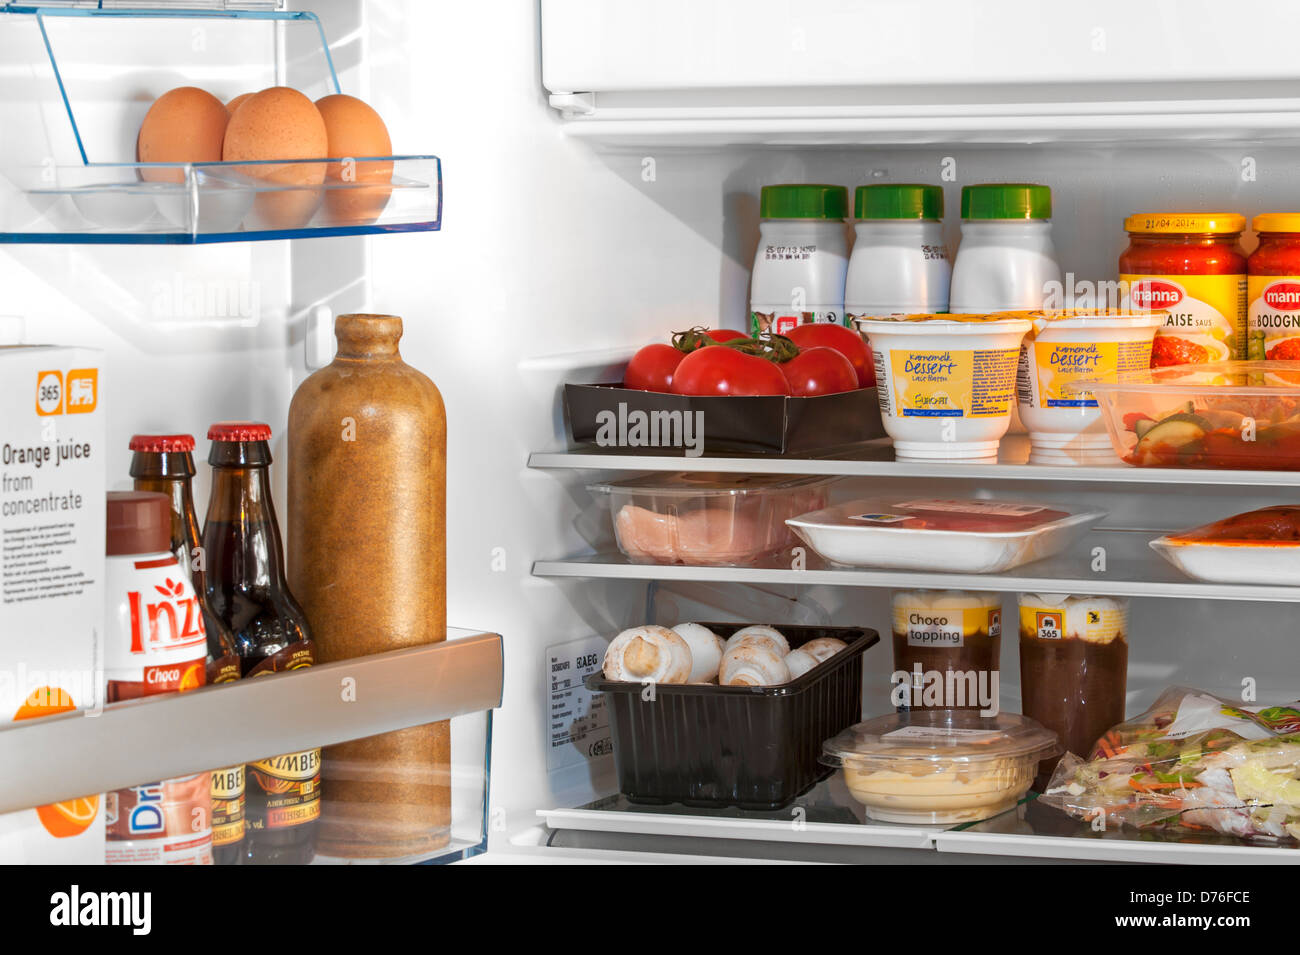 Cooled food and beverages in open fridge / refrigerator in kitchen Stock Photo